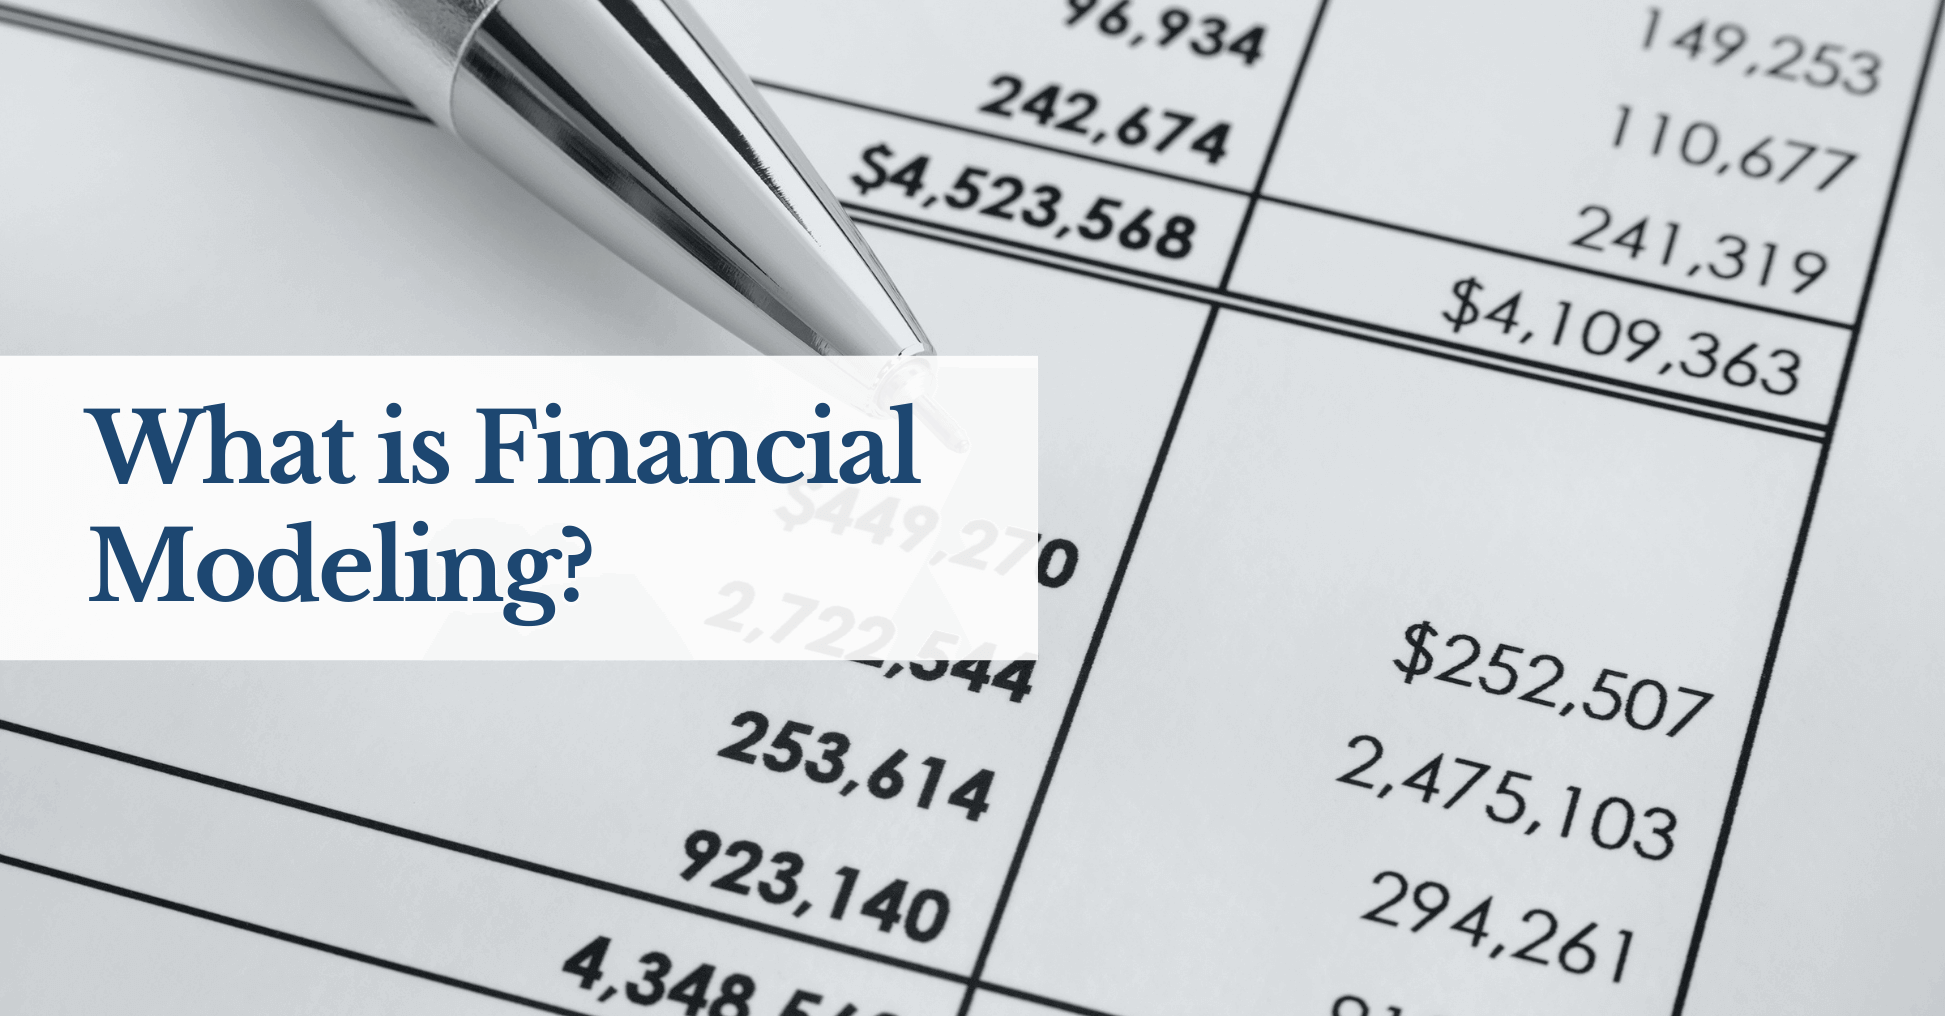 What is Financial Modeling?